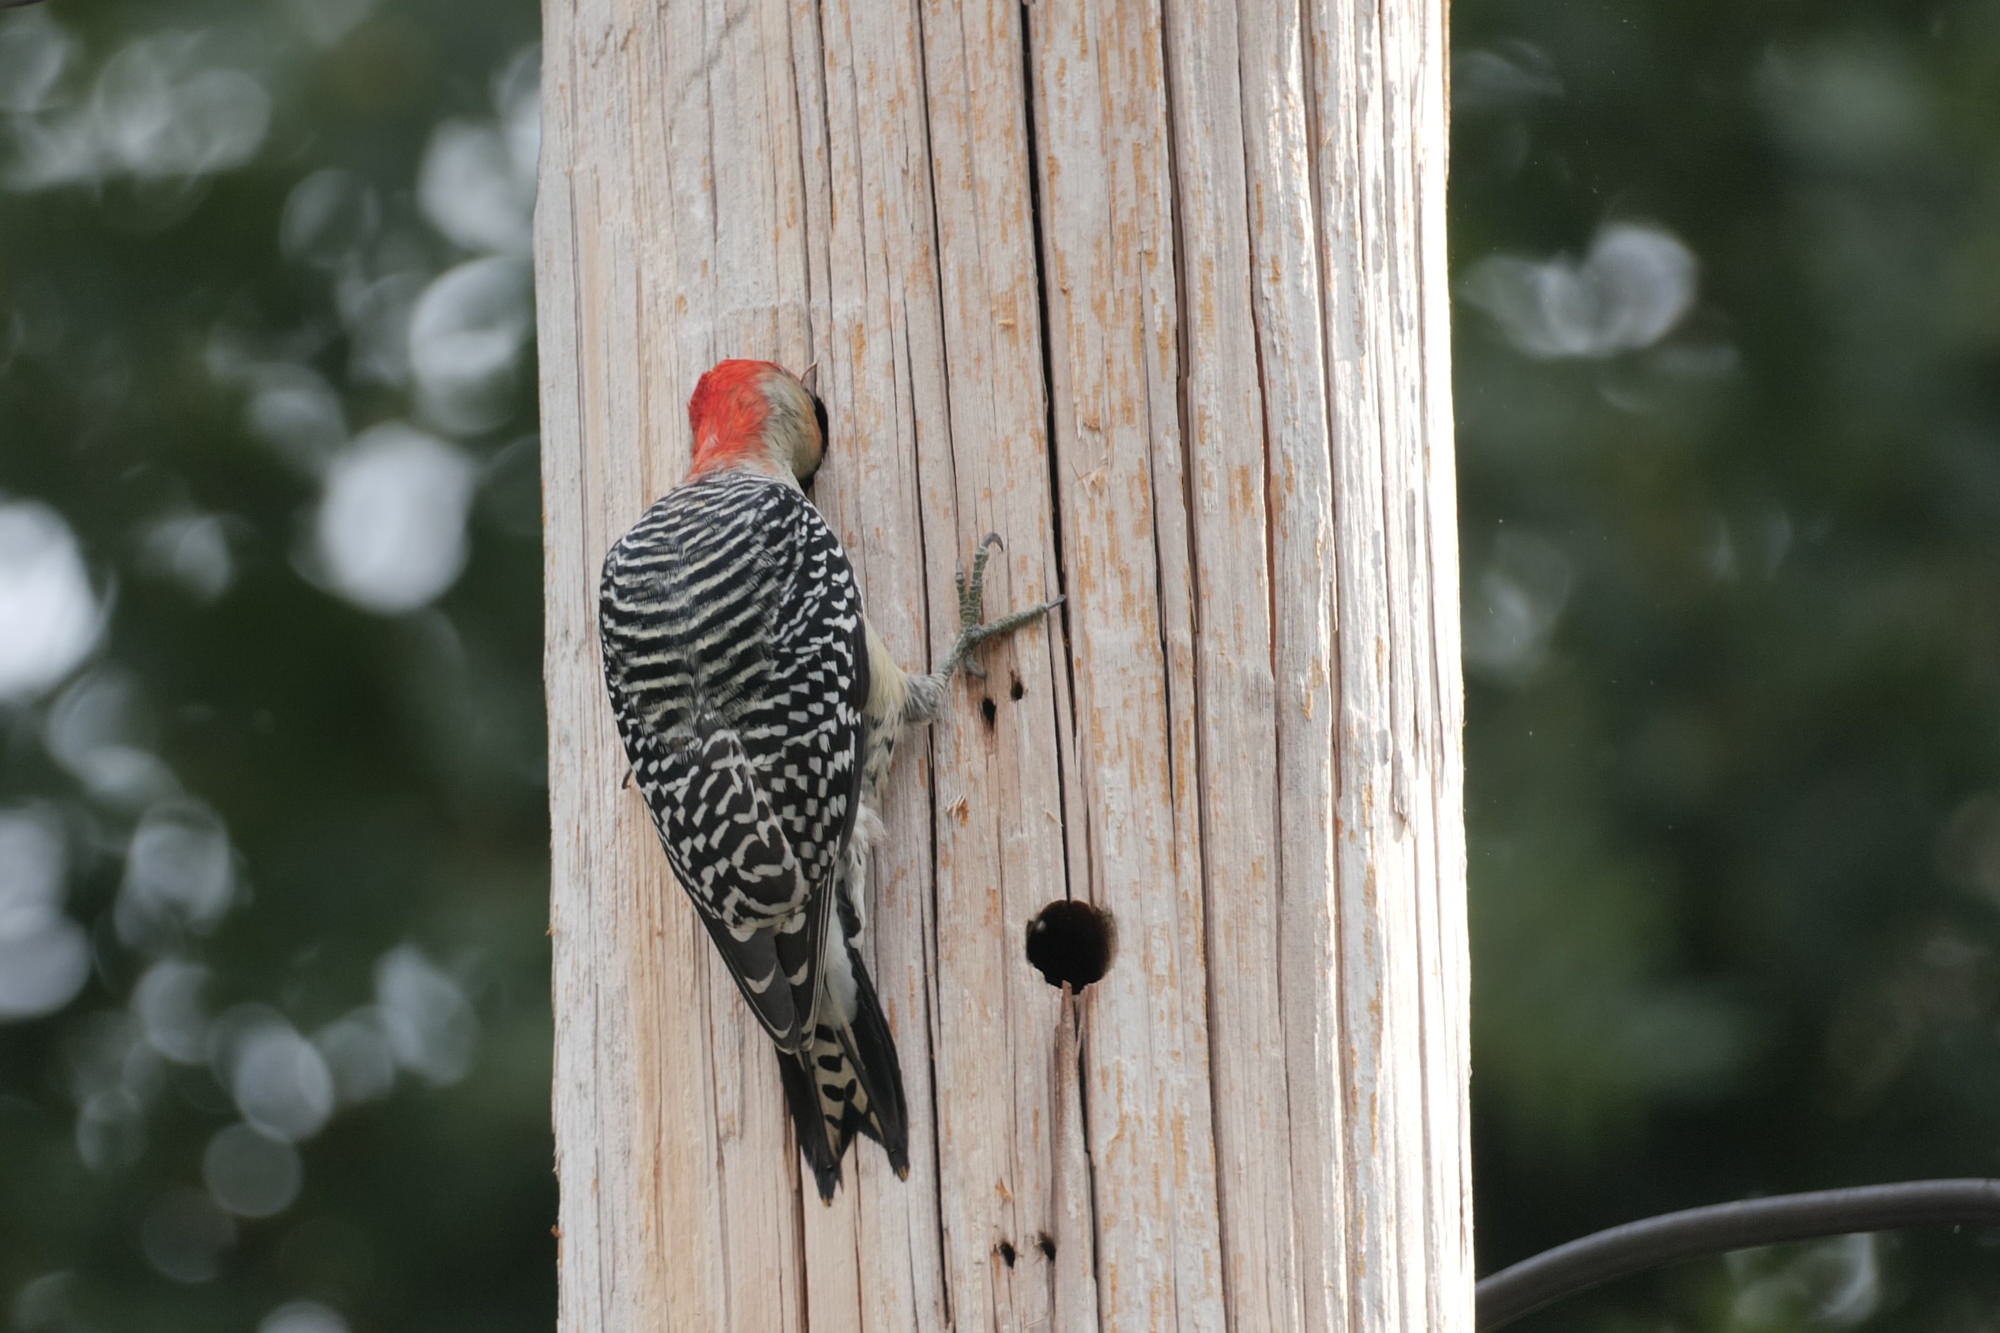 Bird Photography: Red-bellied Woodpecker with its head in a hole on a wood light pole, Taken by Corvida Raven